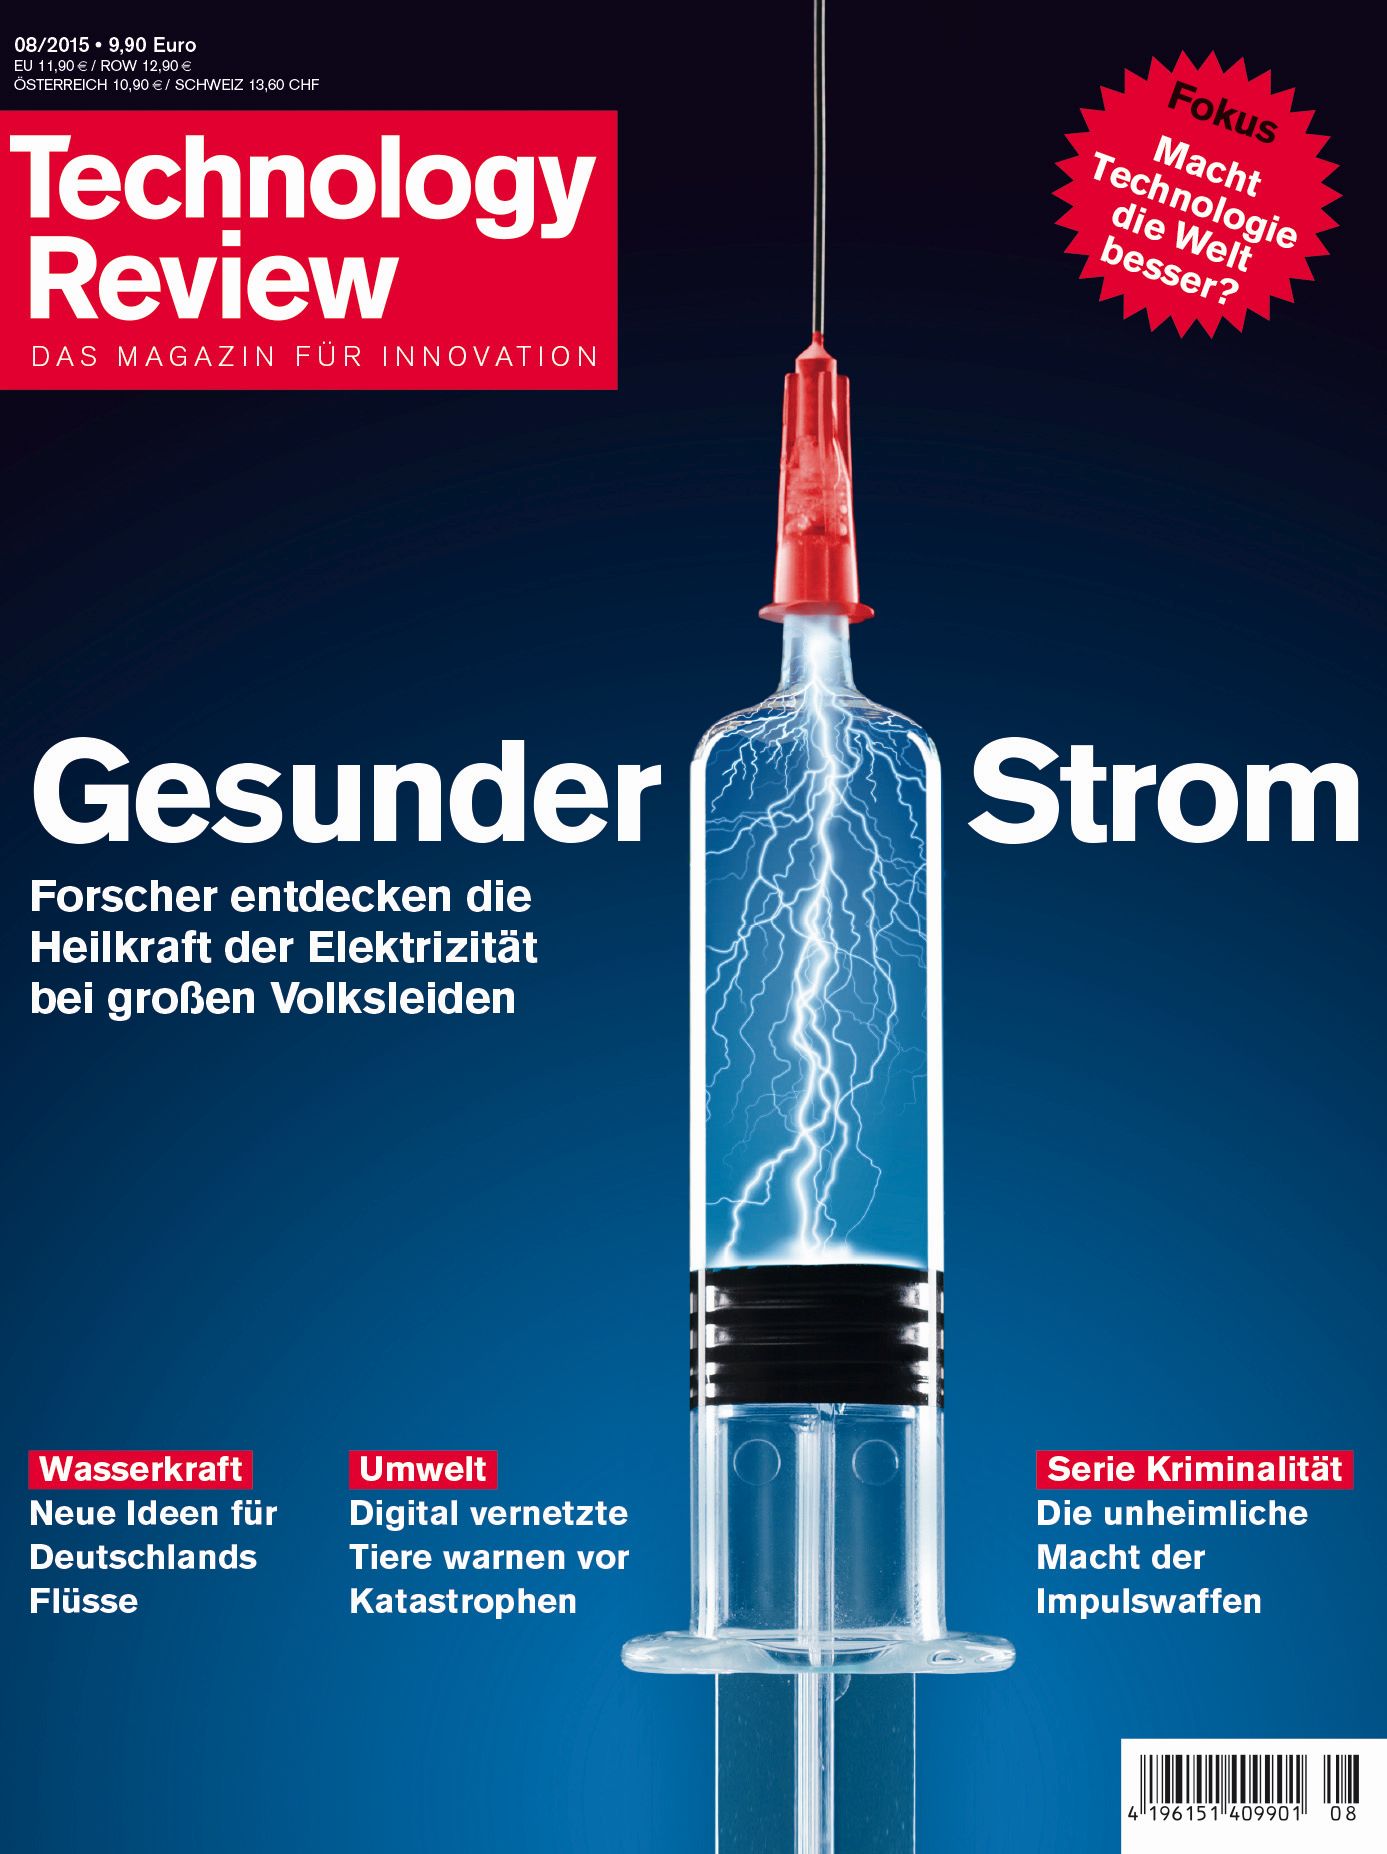 Technology Review 08/2015